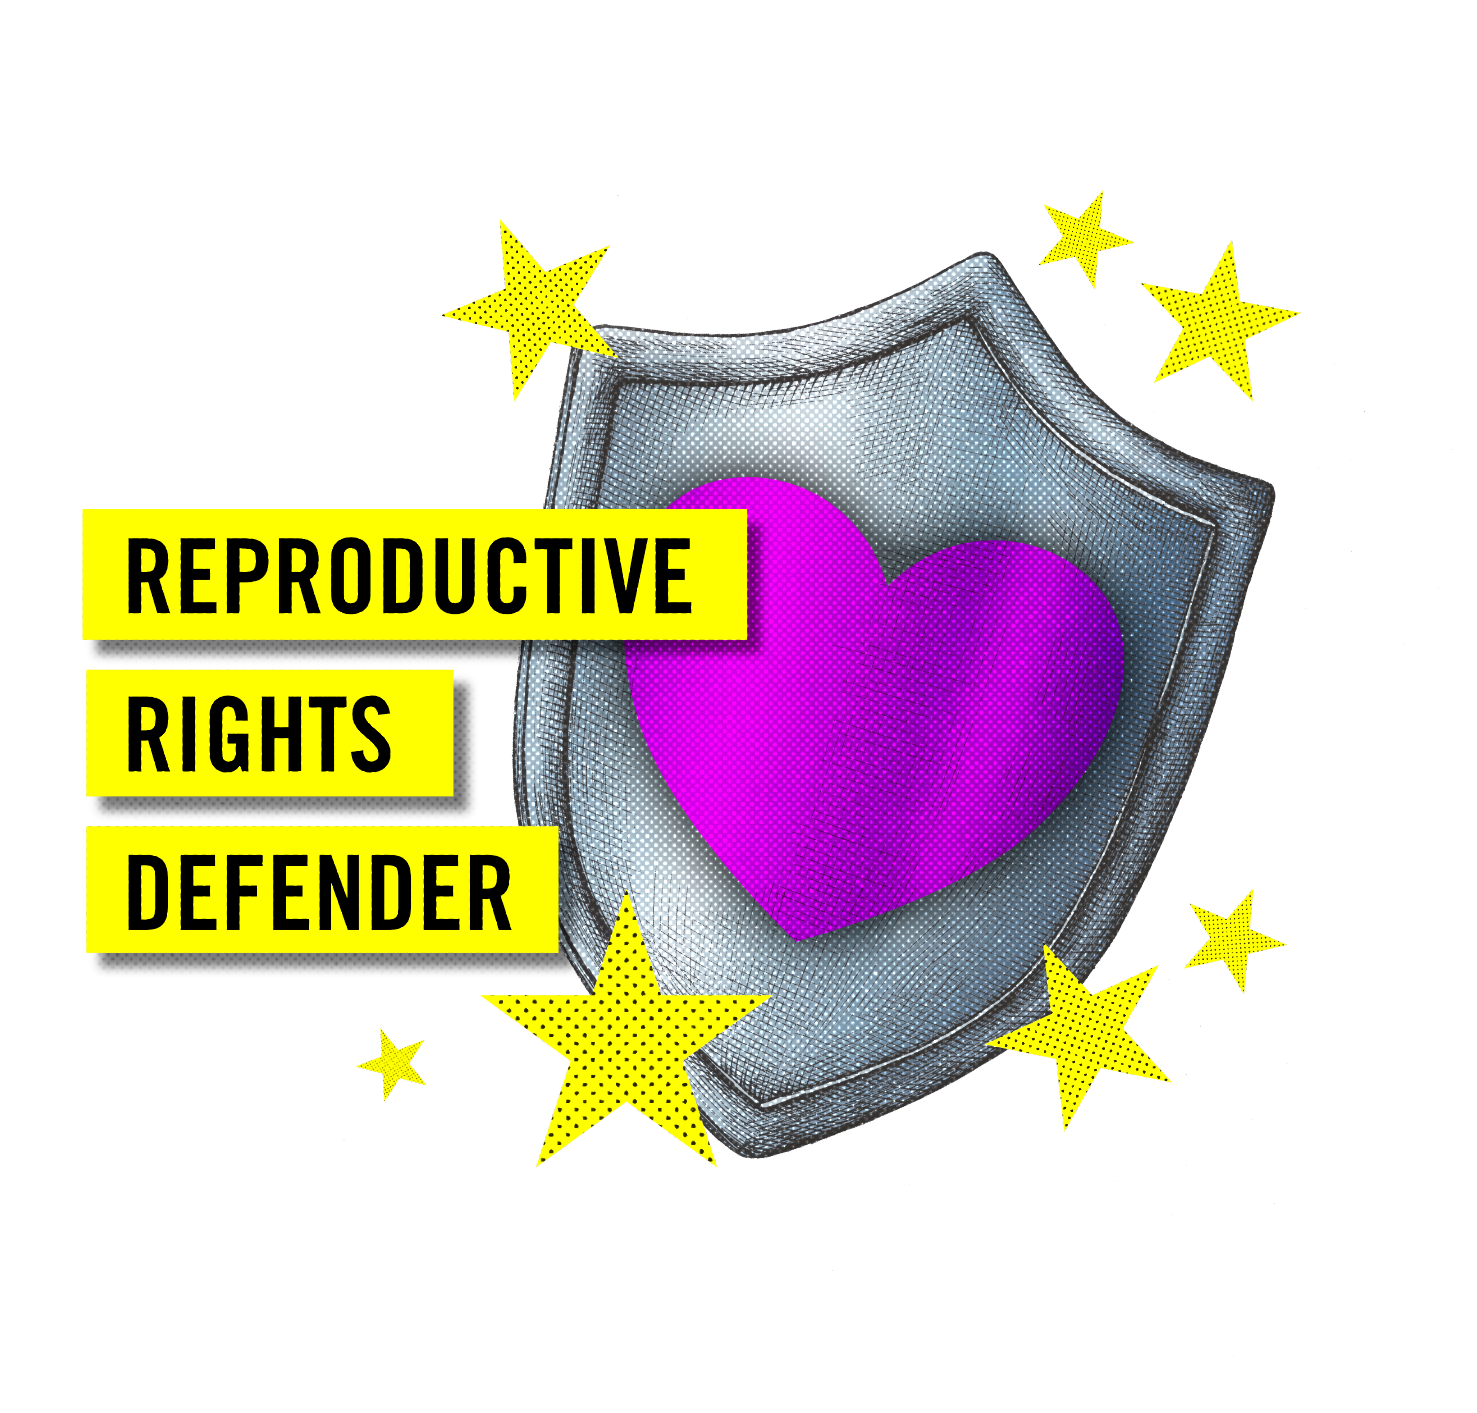 Reproductive Rights Defenders, we need you more than ever. The overturning of Roe v. Wade has sparked outcry and a renewed fight for the right to access abortion care in the United States and everywhere.